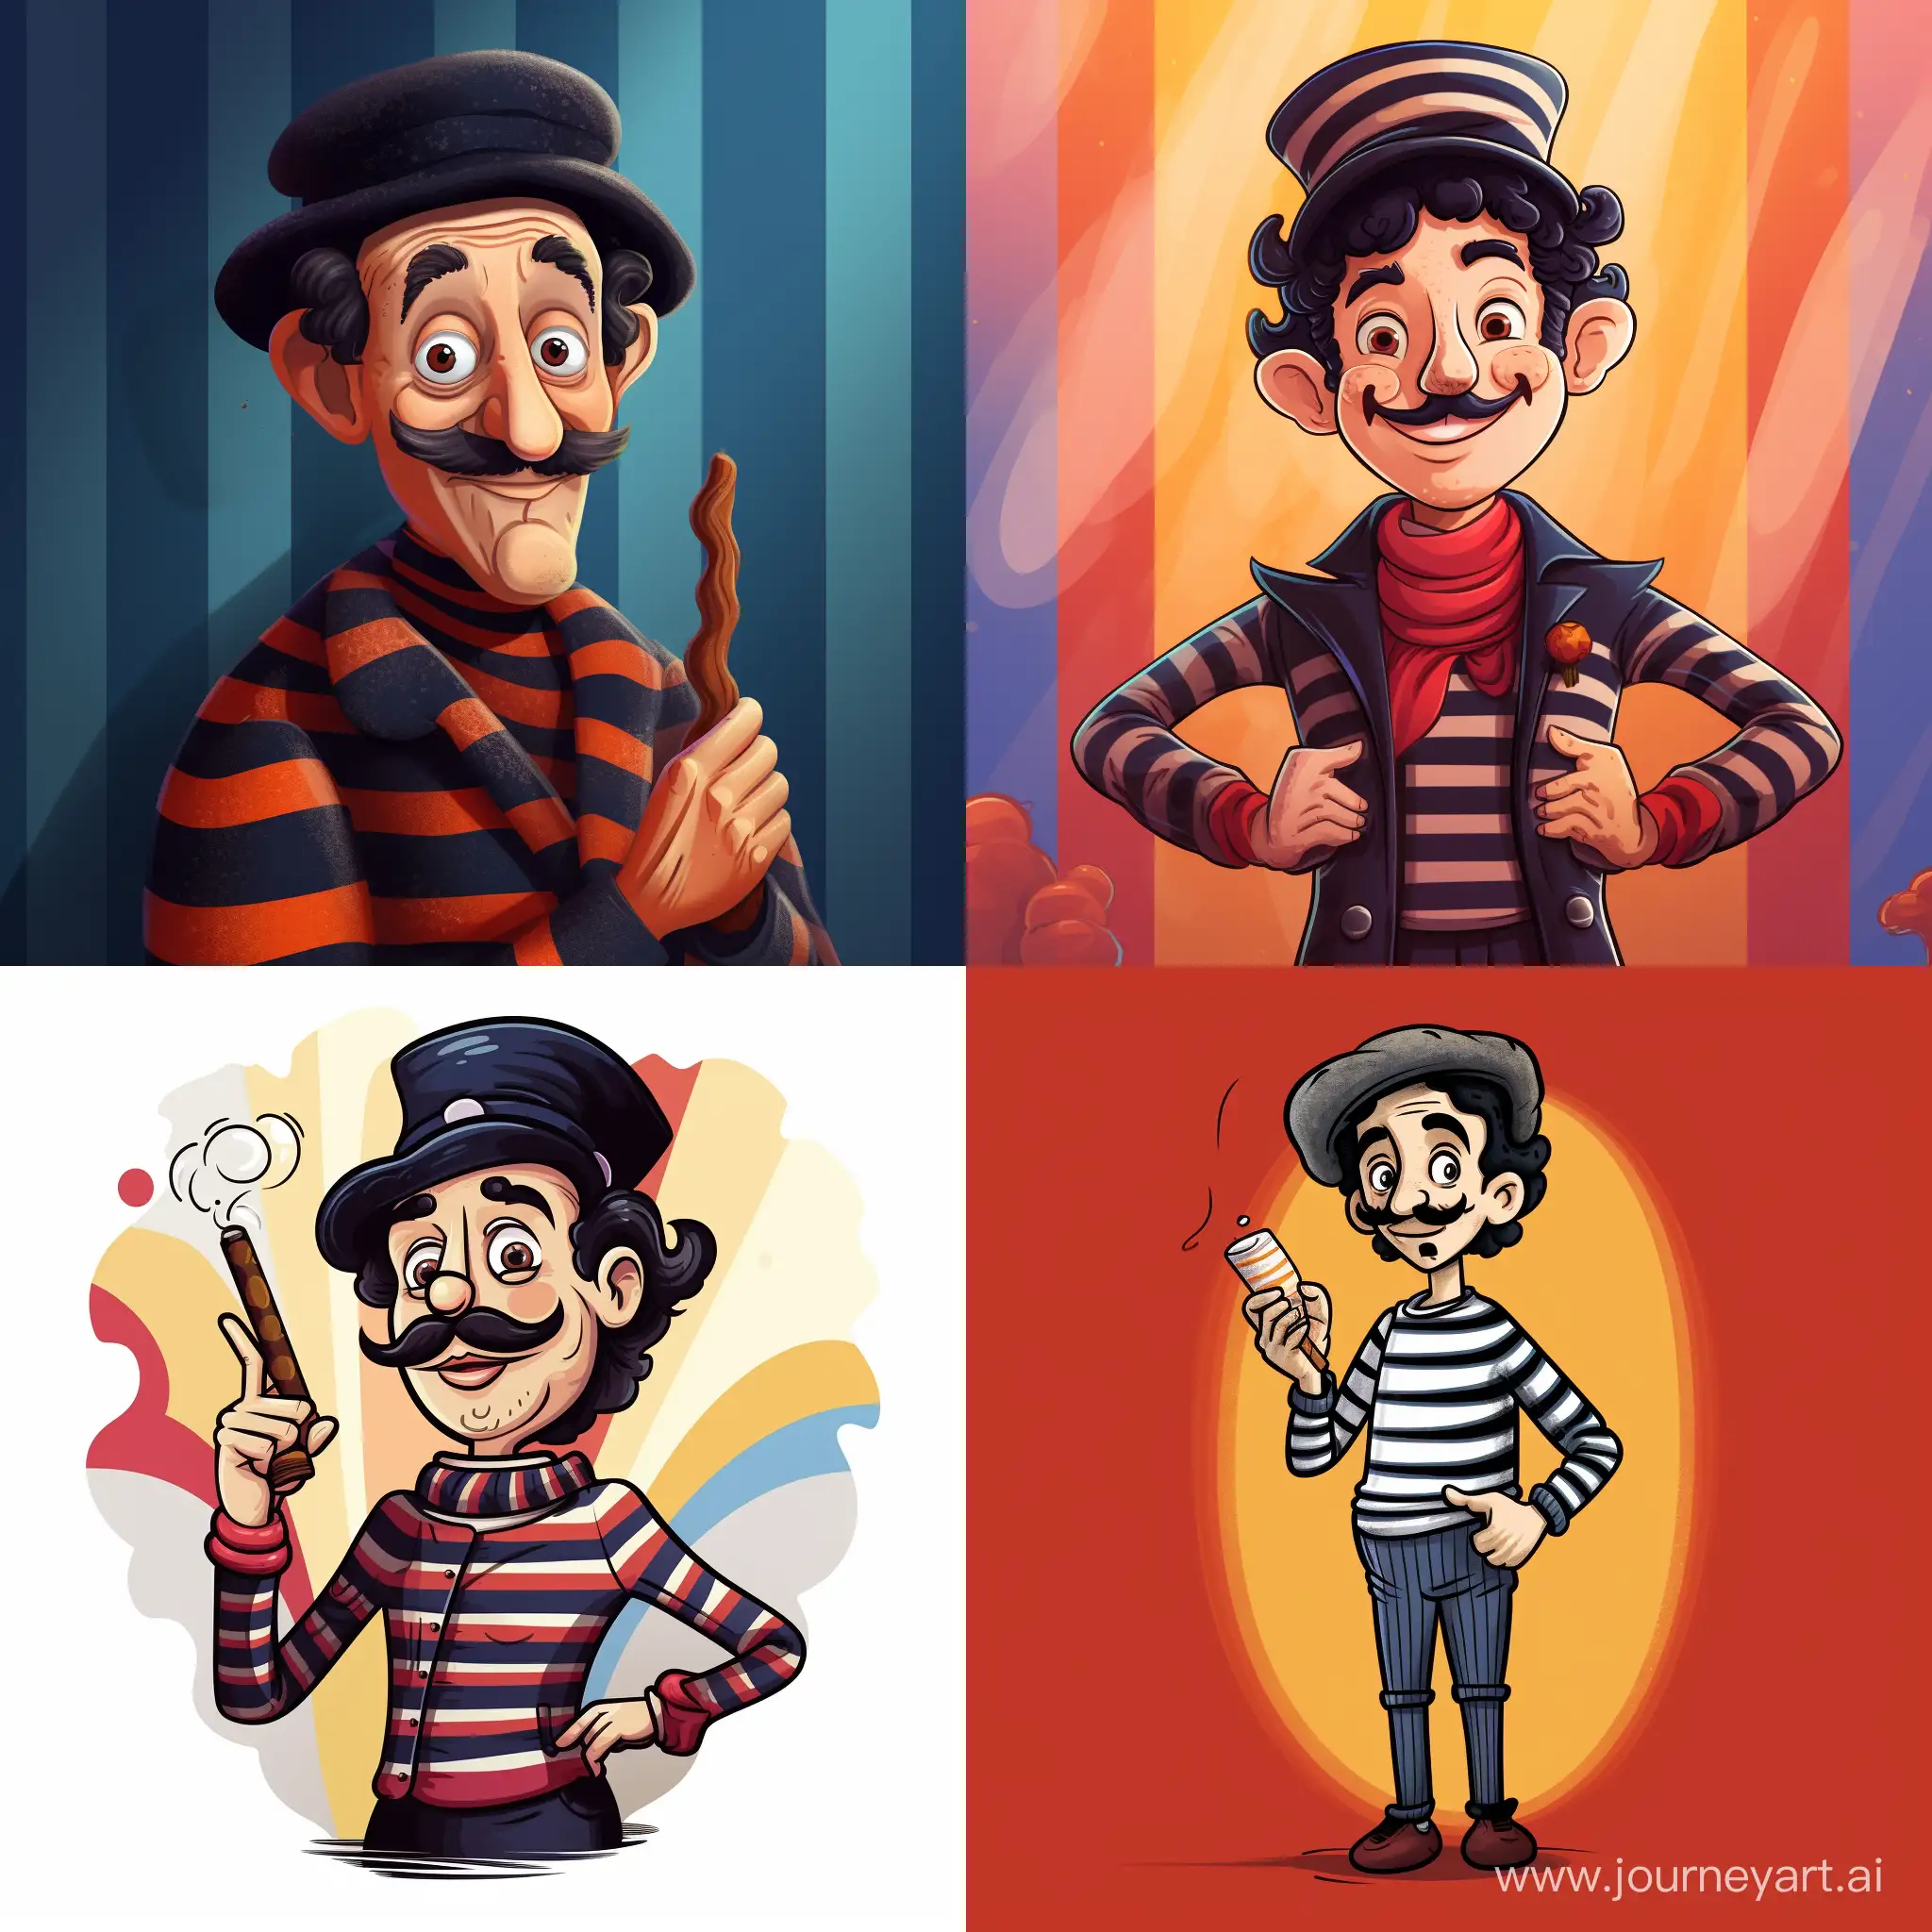 Charming-Frenchman-Cartoon-Character-with-Baguette-Beret-and-Striped-Sweater